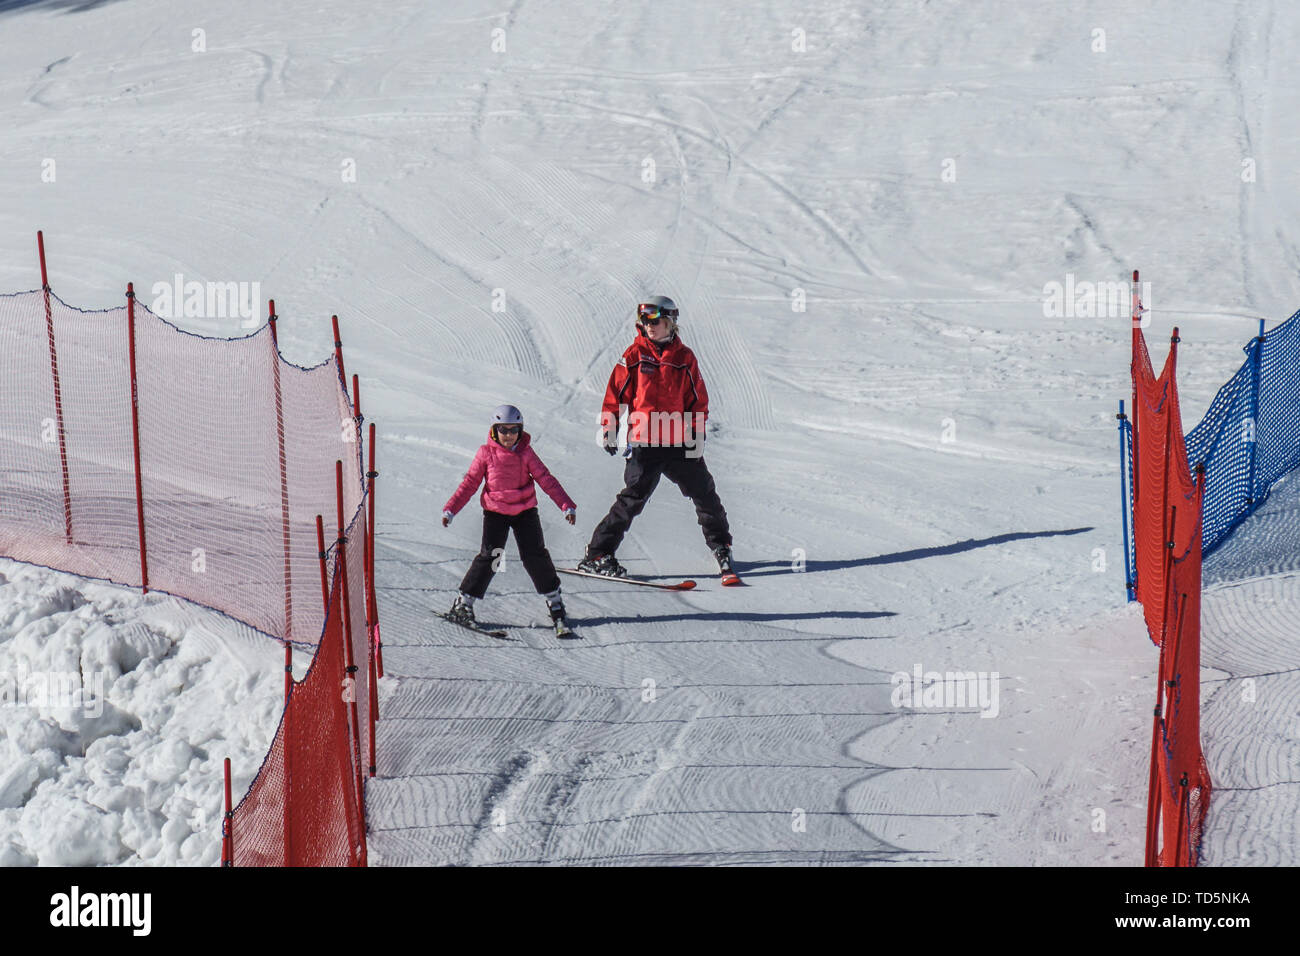 KIMBERLEY, CANADA - MARCH 22, 2019: Mountain Resort view early spring child and ski trainer skiing. Stock Photo